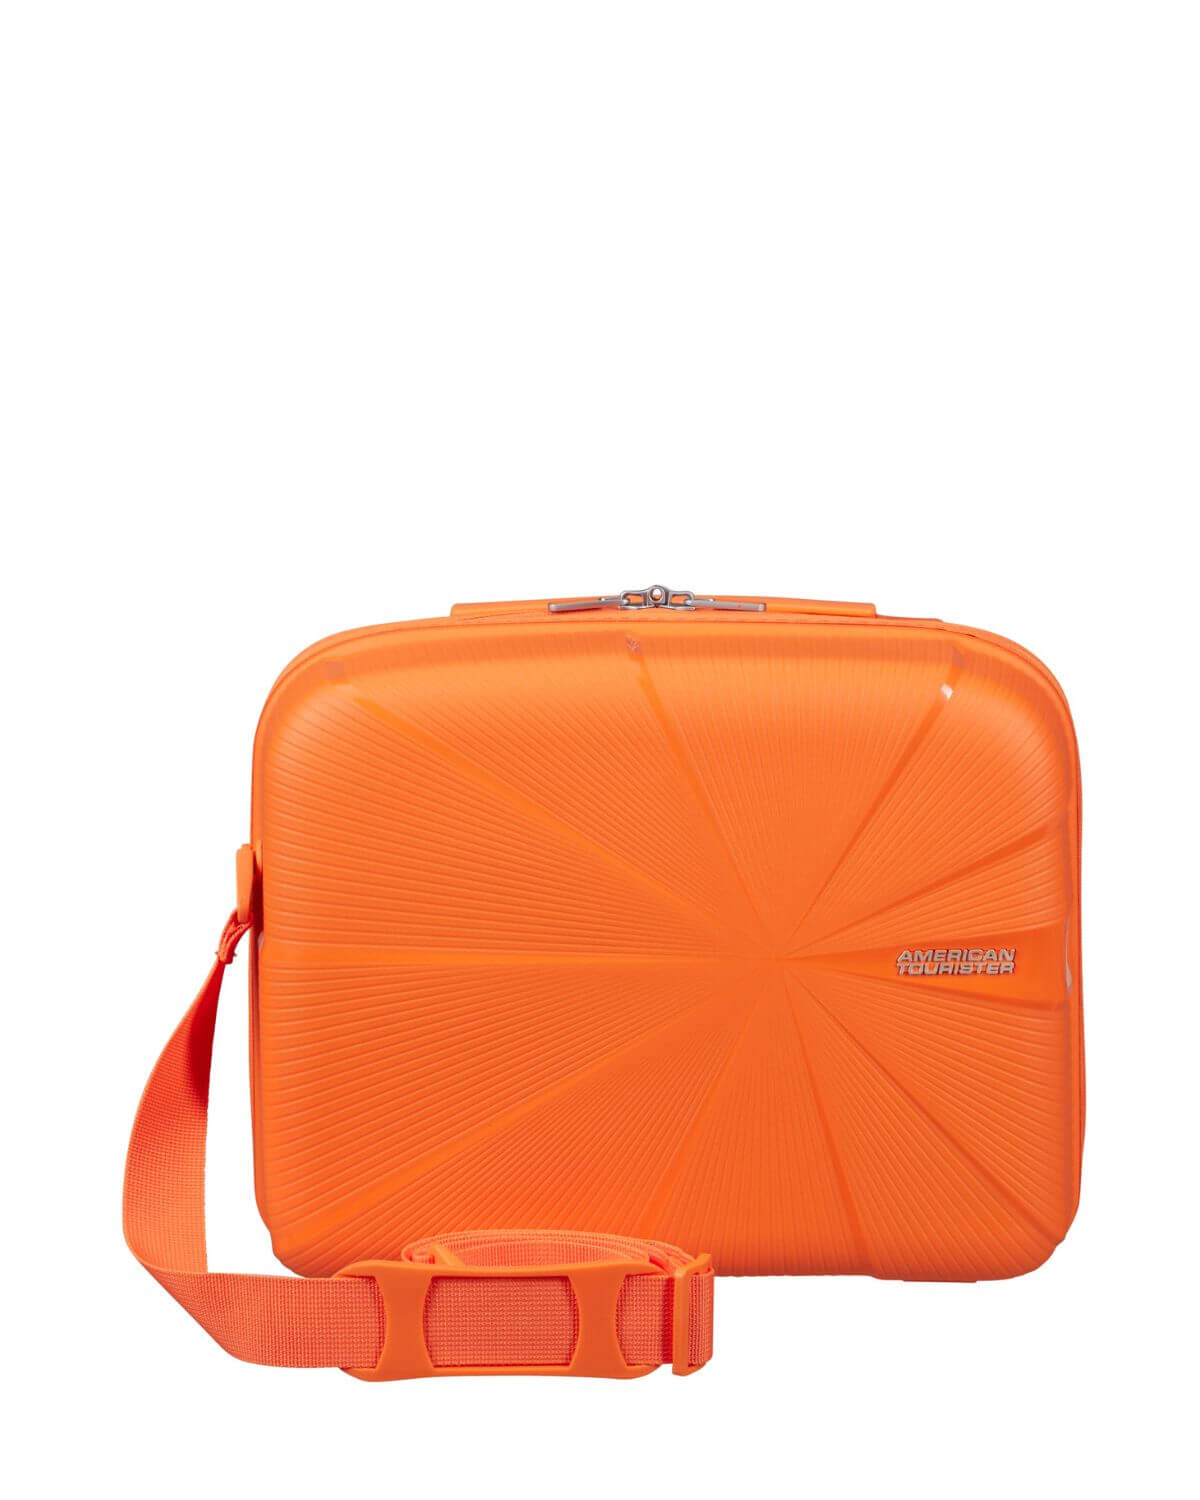 BEAUTY CASE AMERICAN TOURISTER STARVIBE